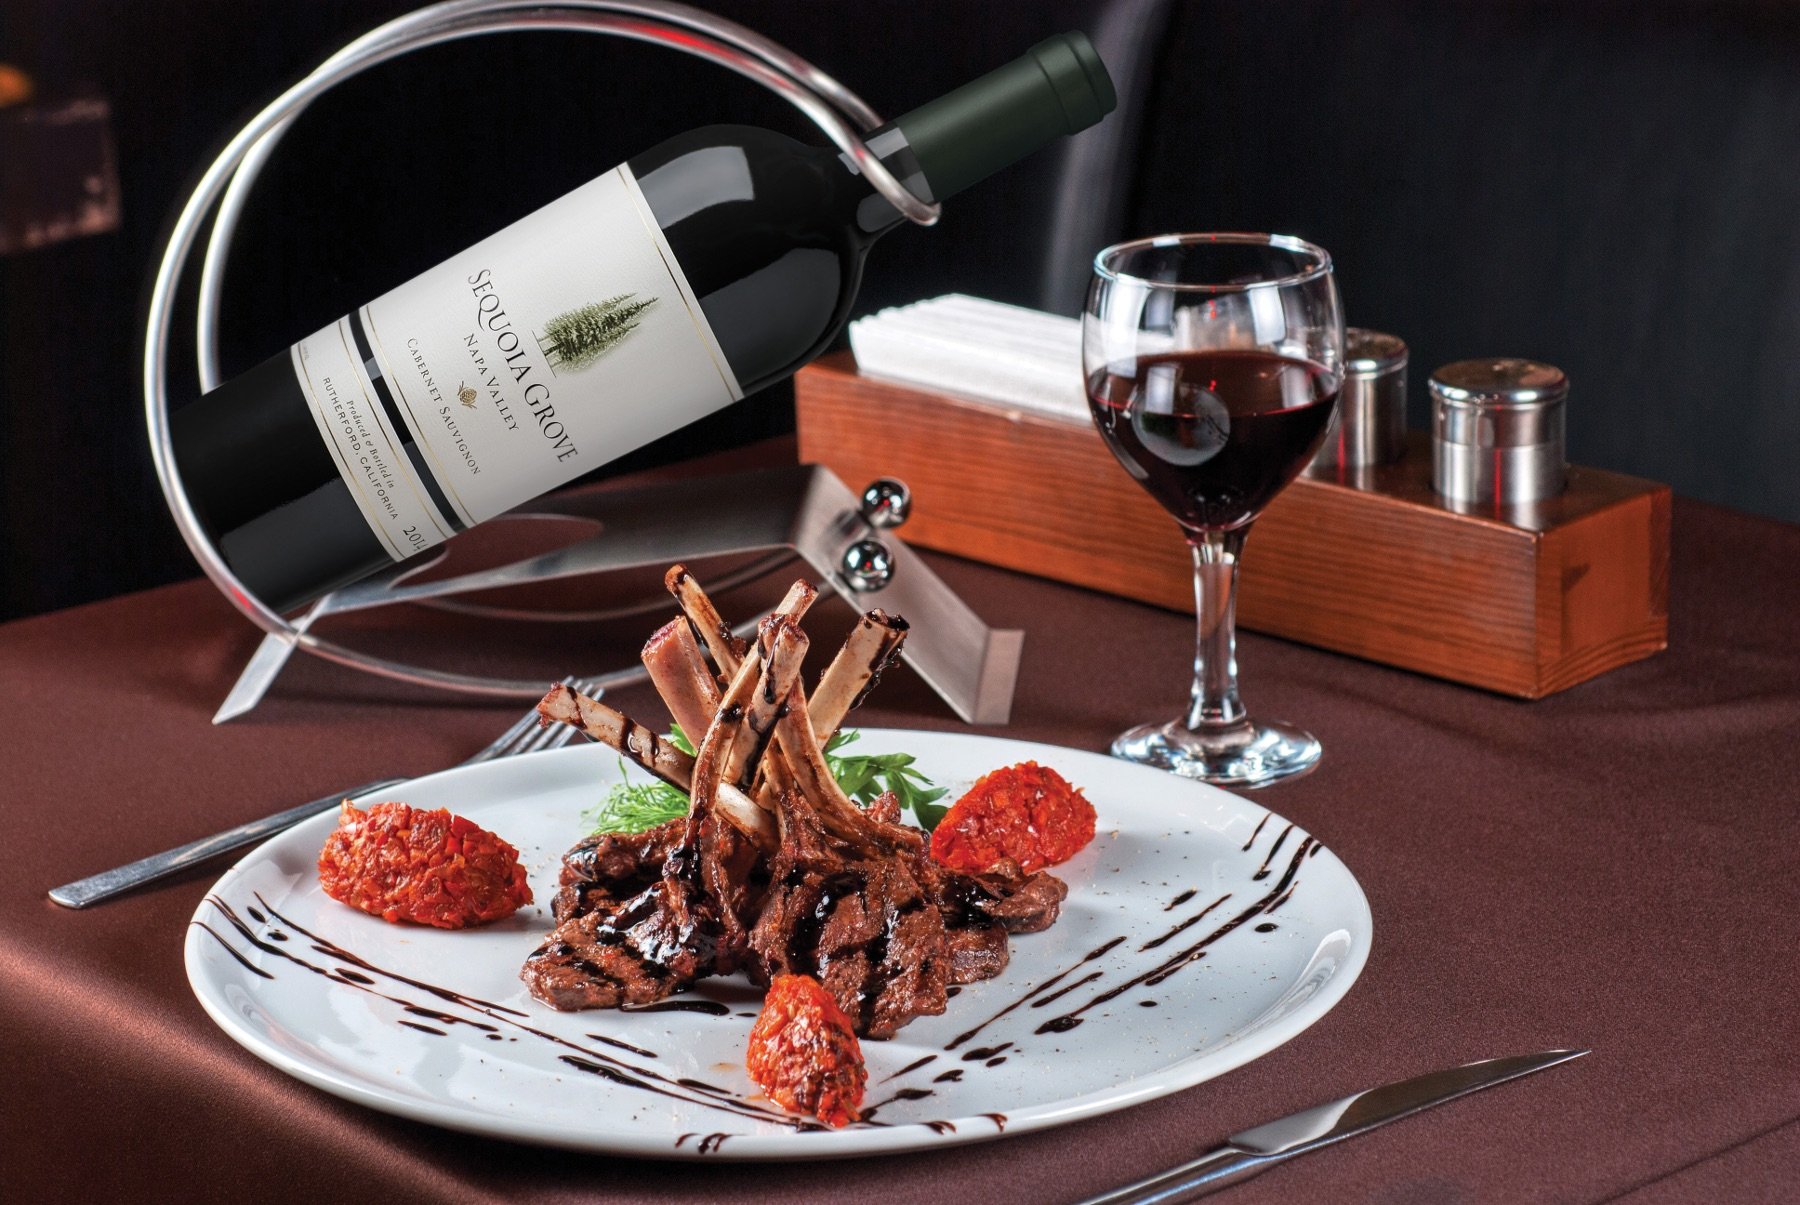 Lamb Chops and Red Wine: A Delicious Pairing